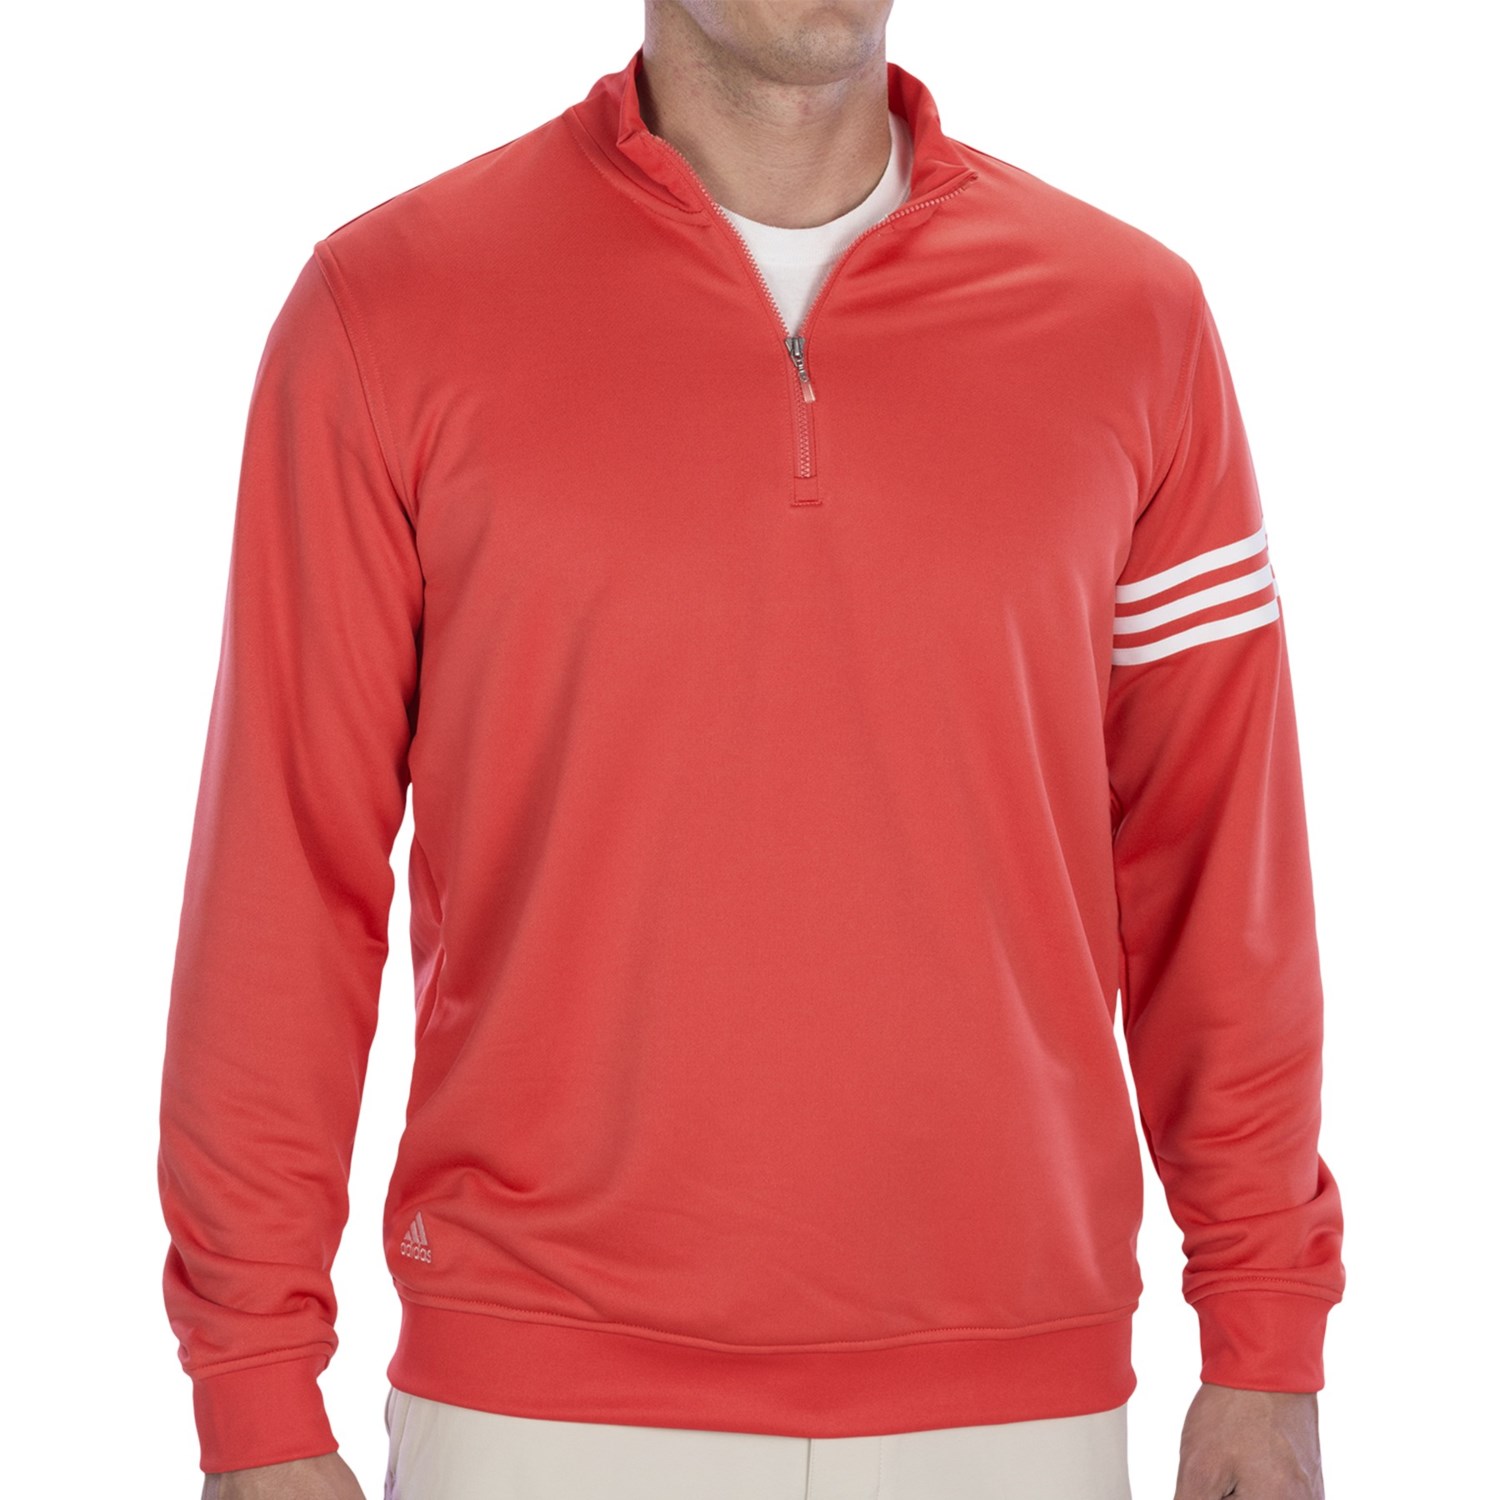 adidas-golf-climalite-3-stripes-pullover